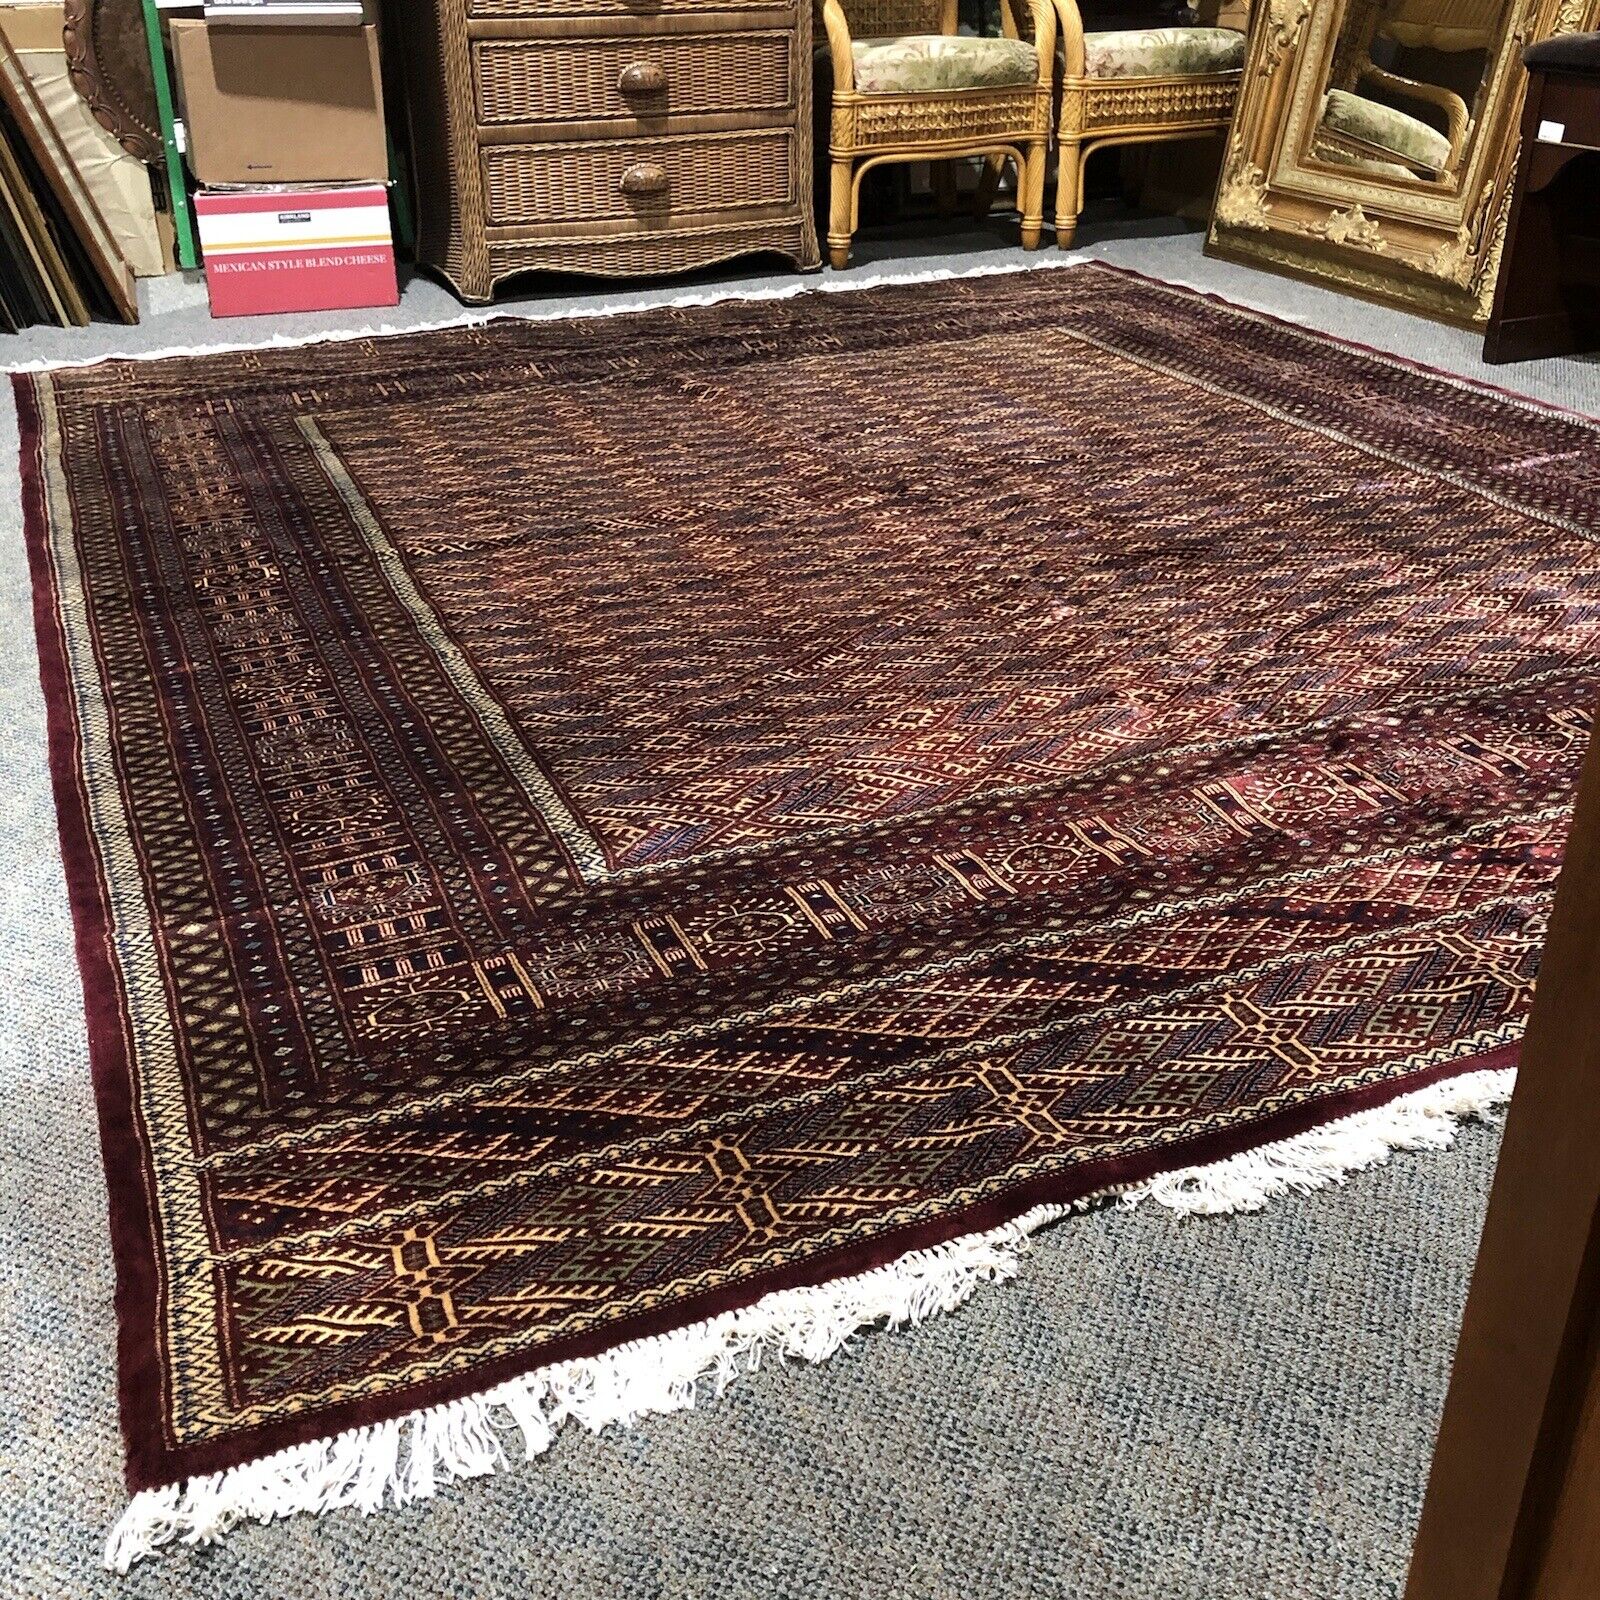 9 FT. X 8 1 / 2 FT. HAND MADE ORIENTAL WOOL RUG PAKISTAN TIGHT WEAVE EXCELLENT 